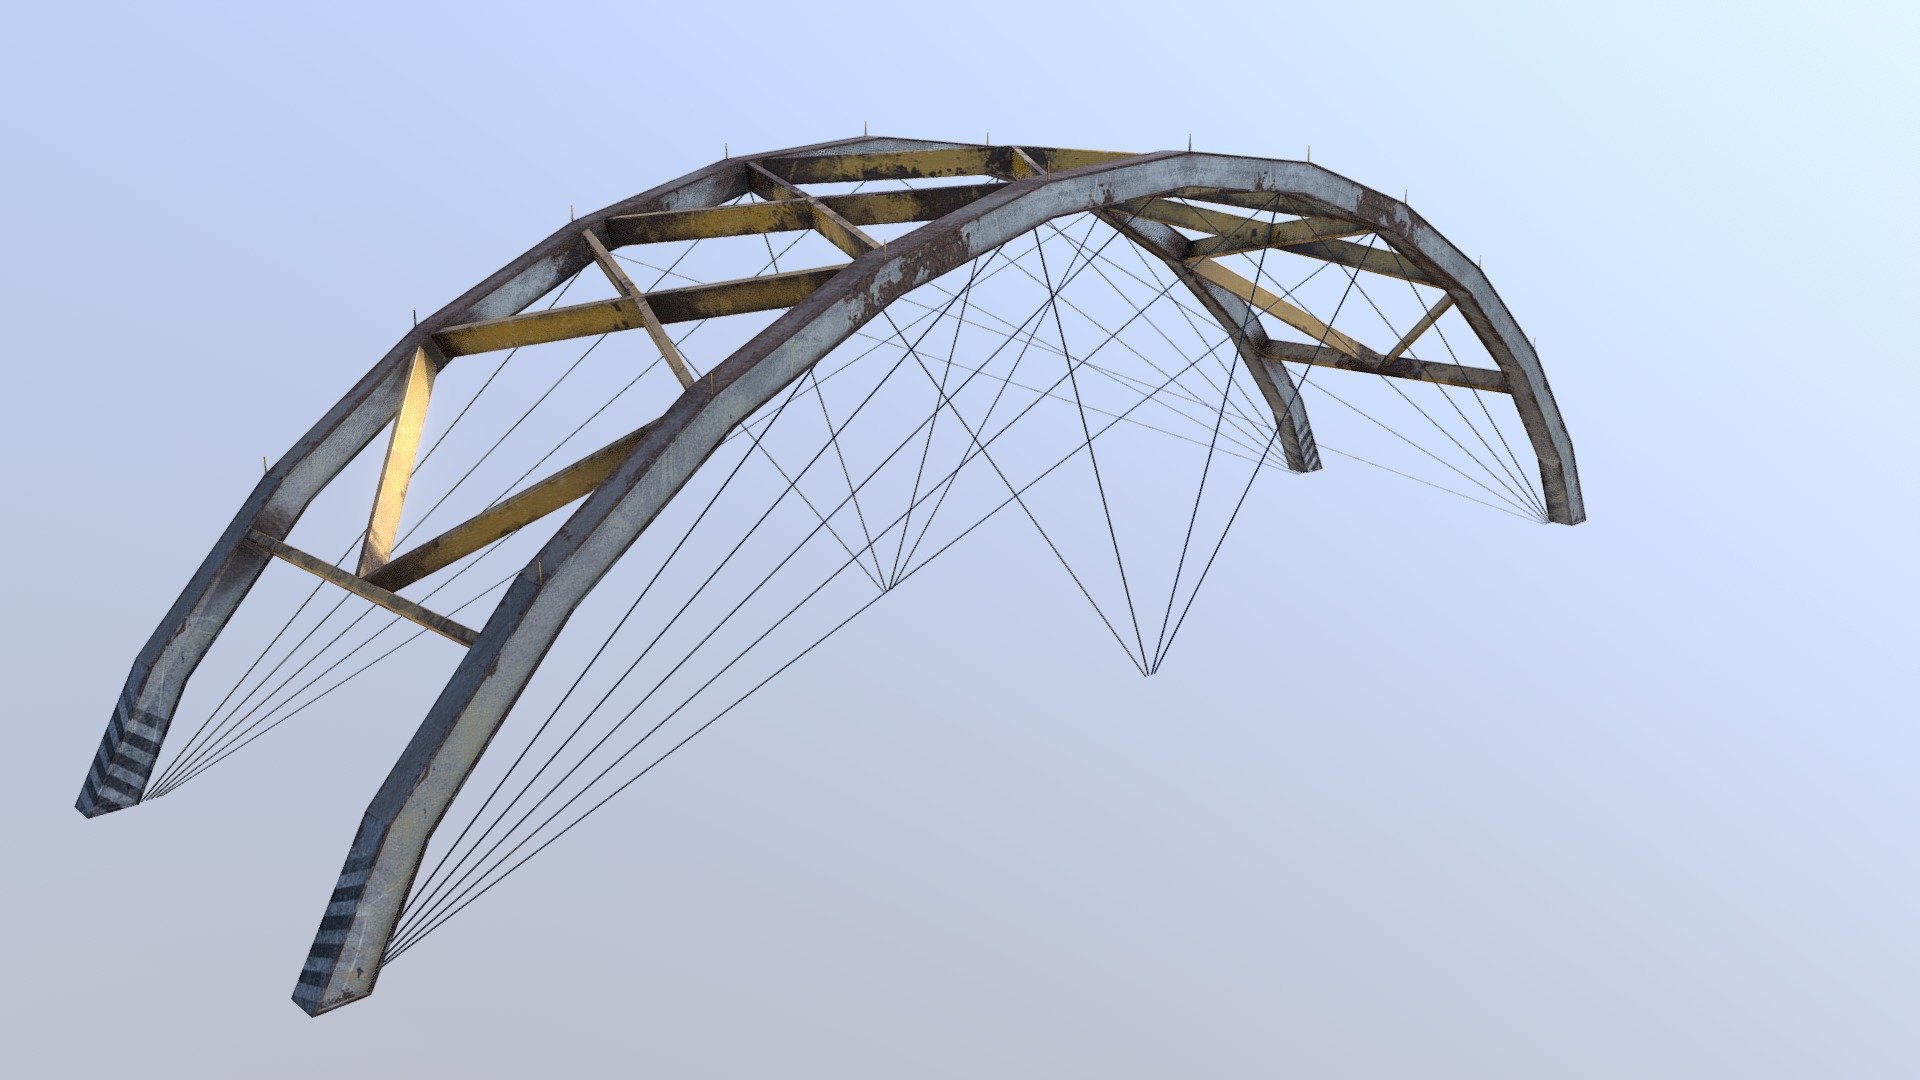 This is an industrial bridge model created for Crowbar's entry in the BridgeVille mapping challenge:
https://runthinkshootlive.com/posts/bridgeville

This is a rather old model and the bridge itself might not be completely realistic in terms of structure, but it was created to satisfy the requirements of the map.

Modeled in 3DS Max, textured in Substance Painter 3d model